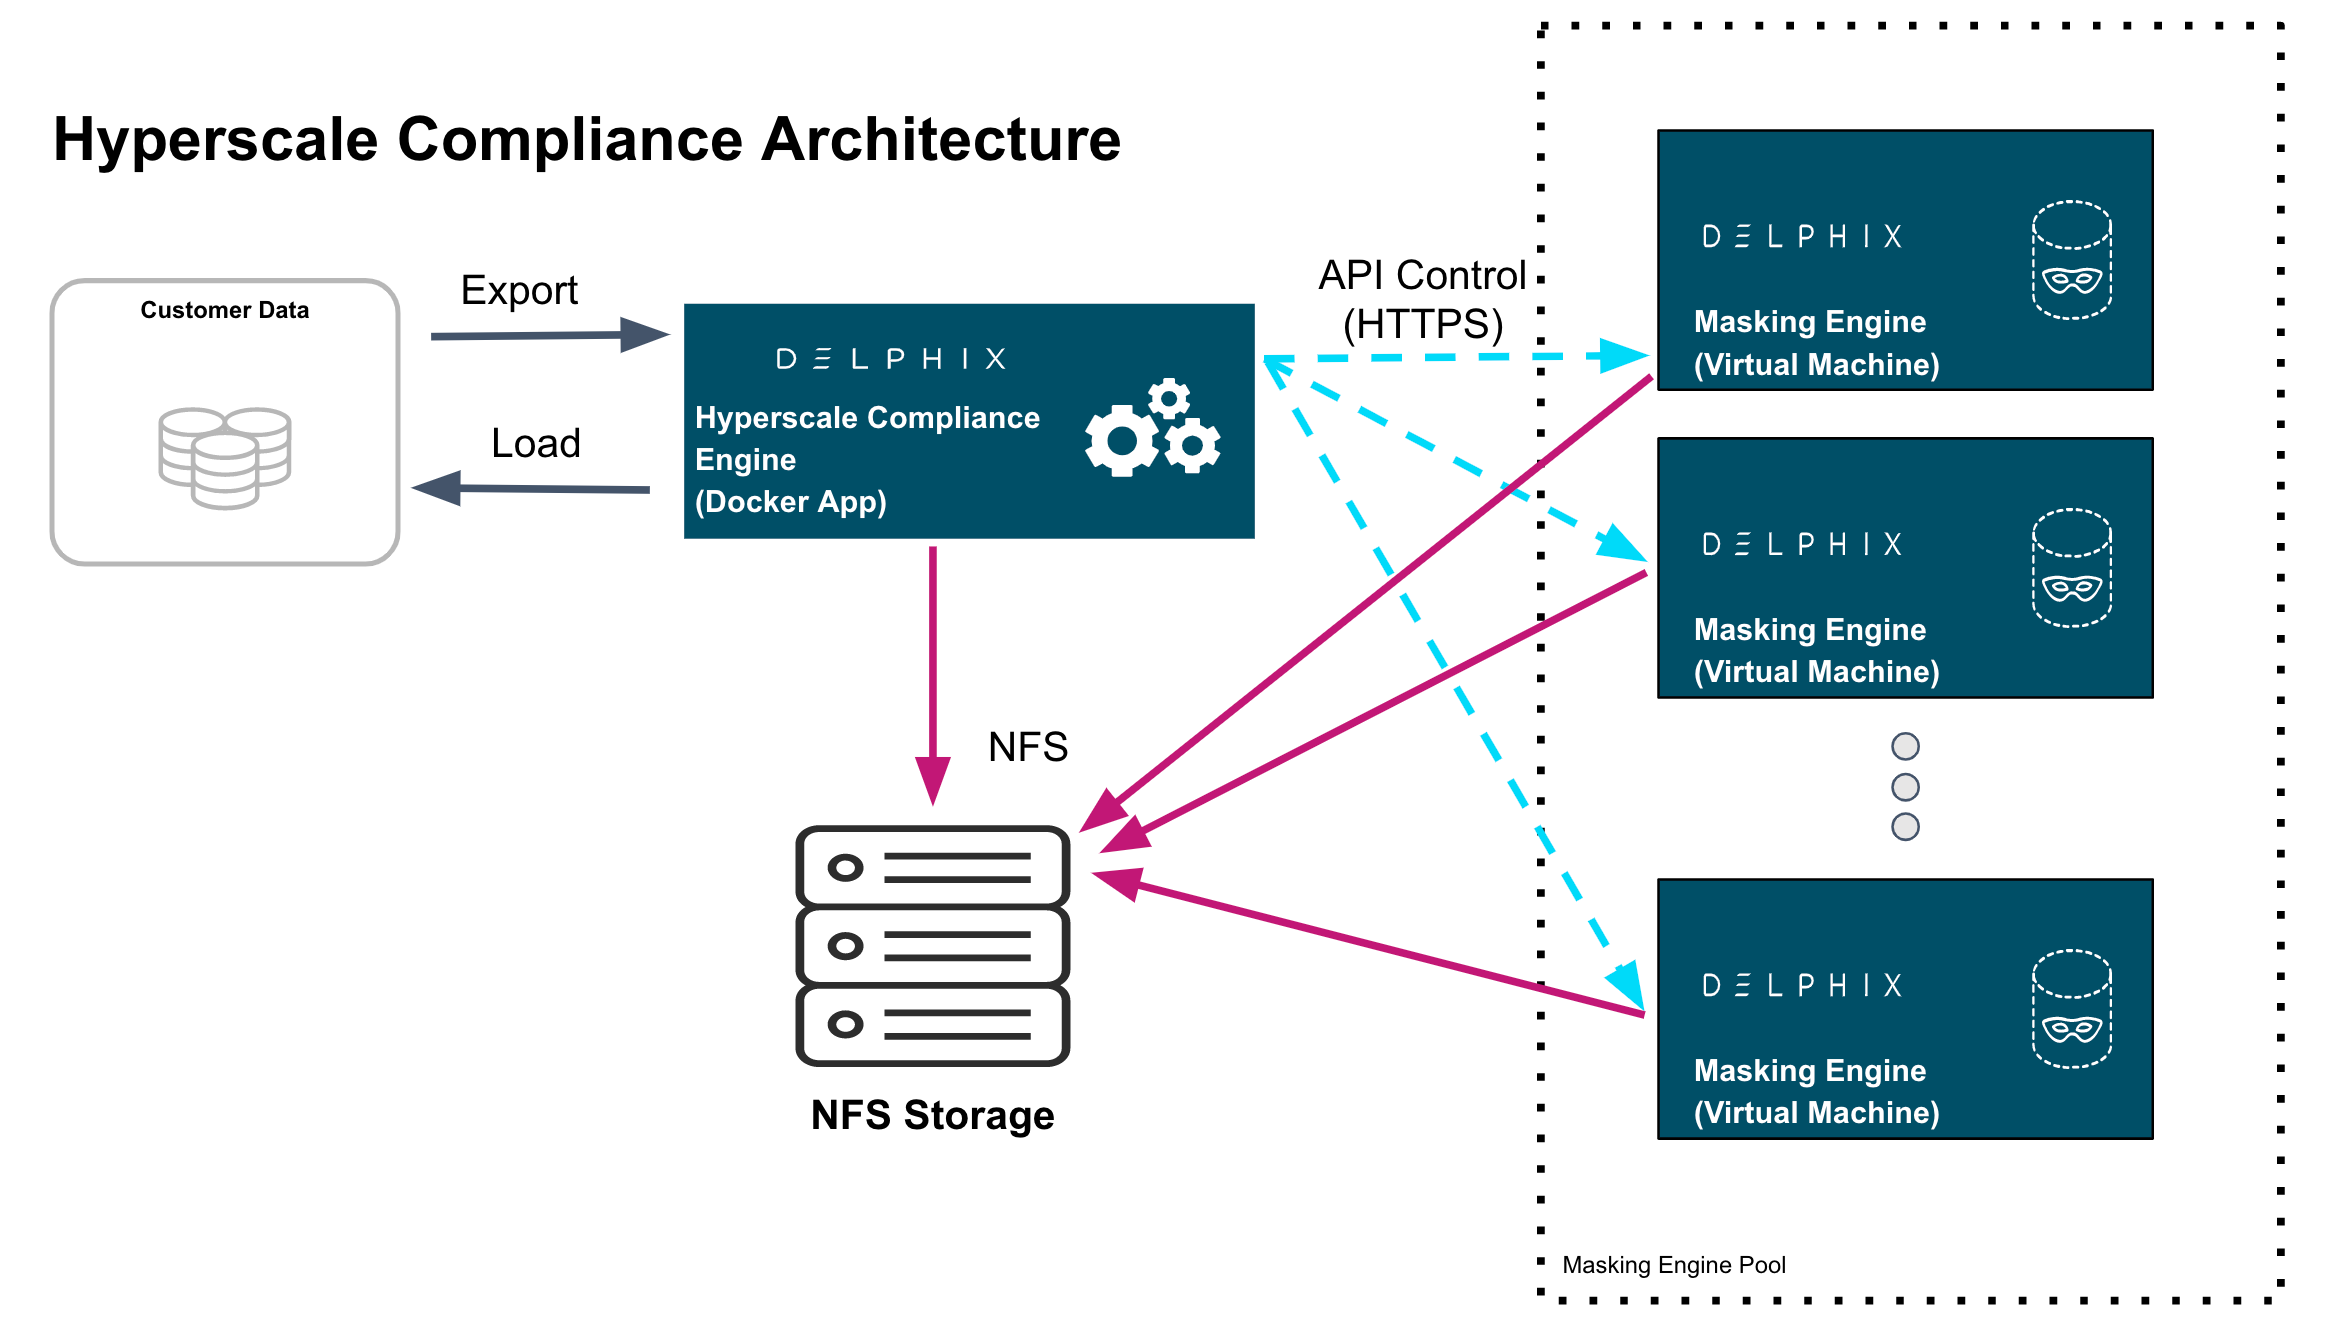 Hypersacle Compliance architecture